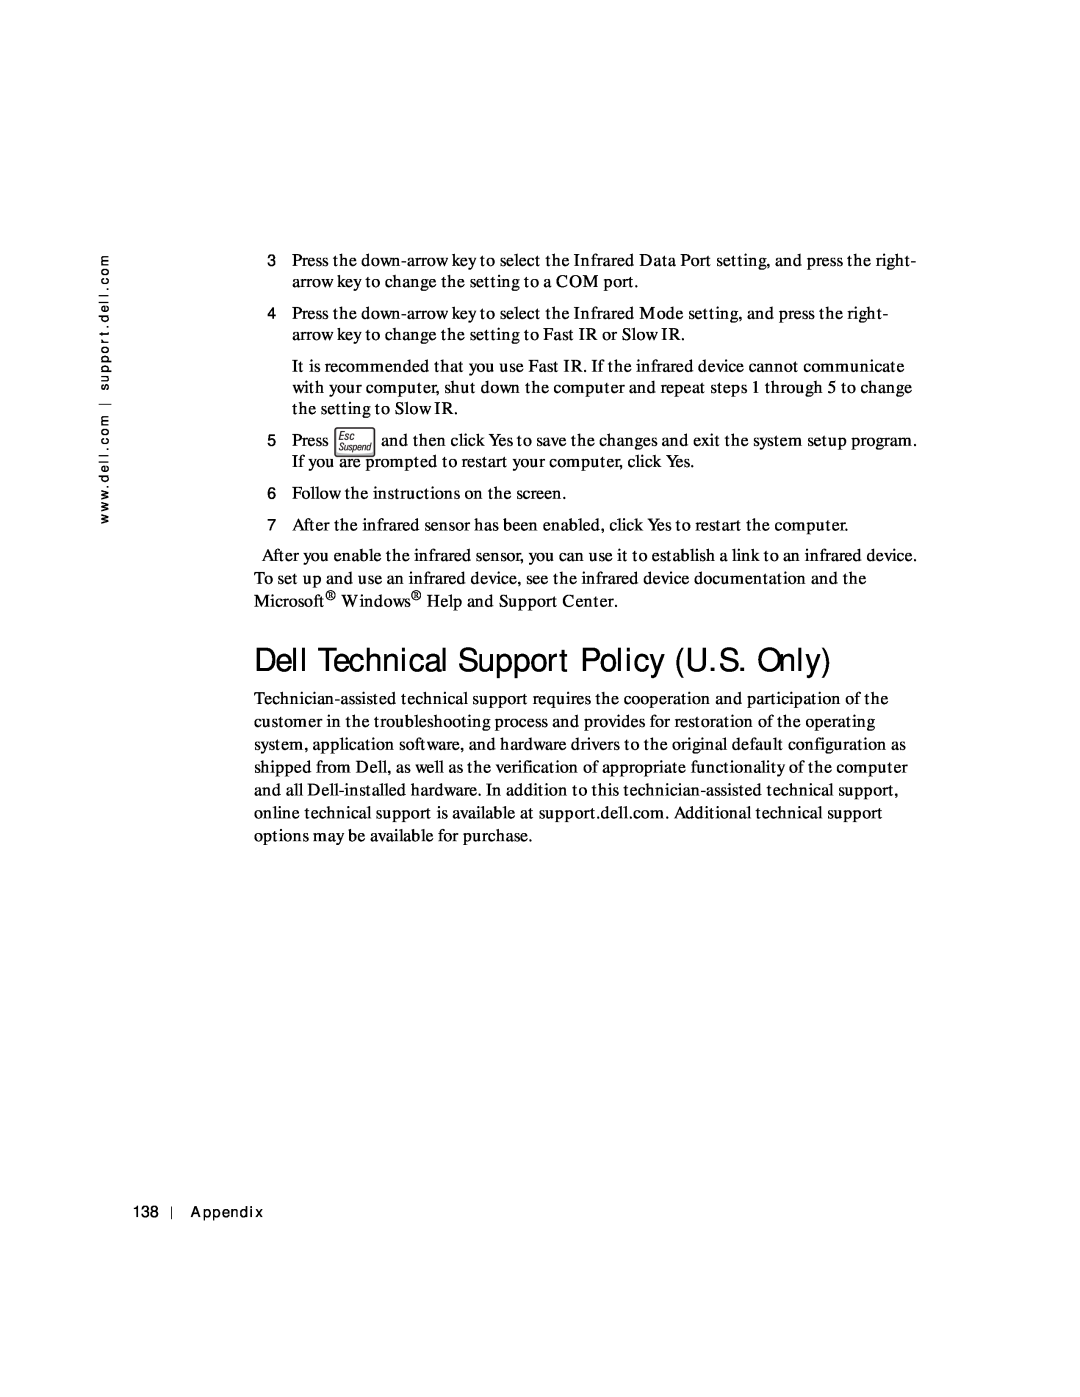 Dell 8600 manual Dell Technical Support Policy U.S. Only 